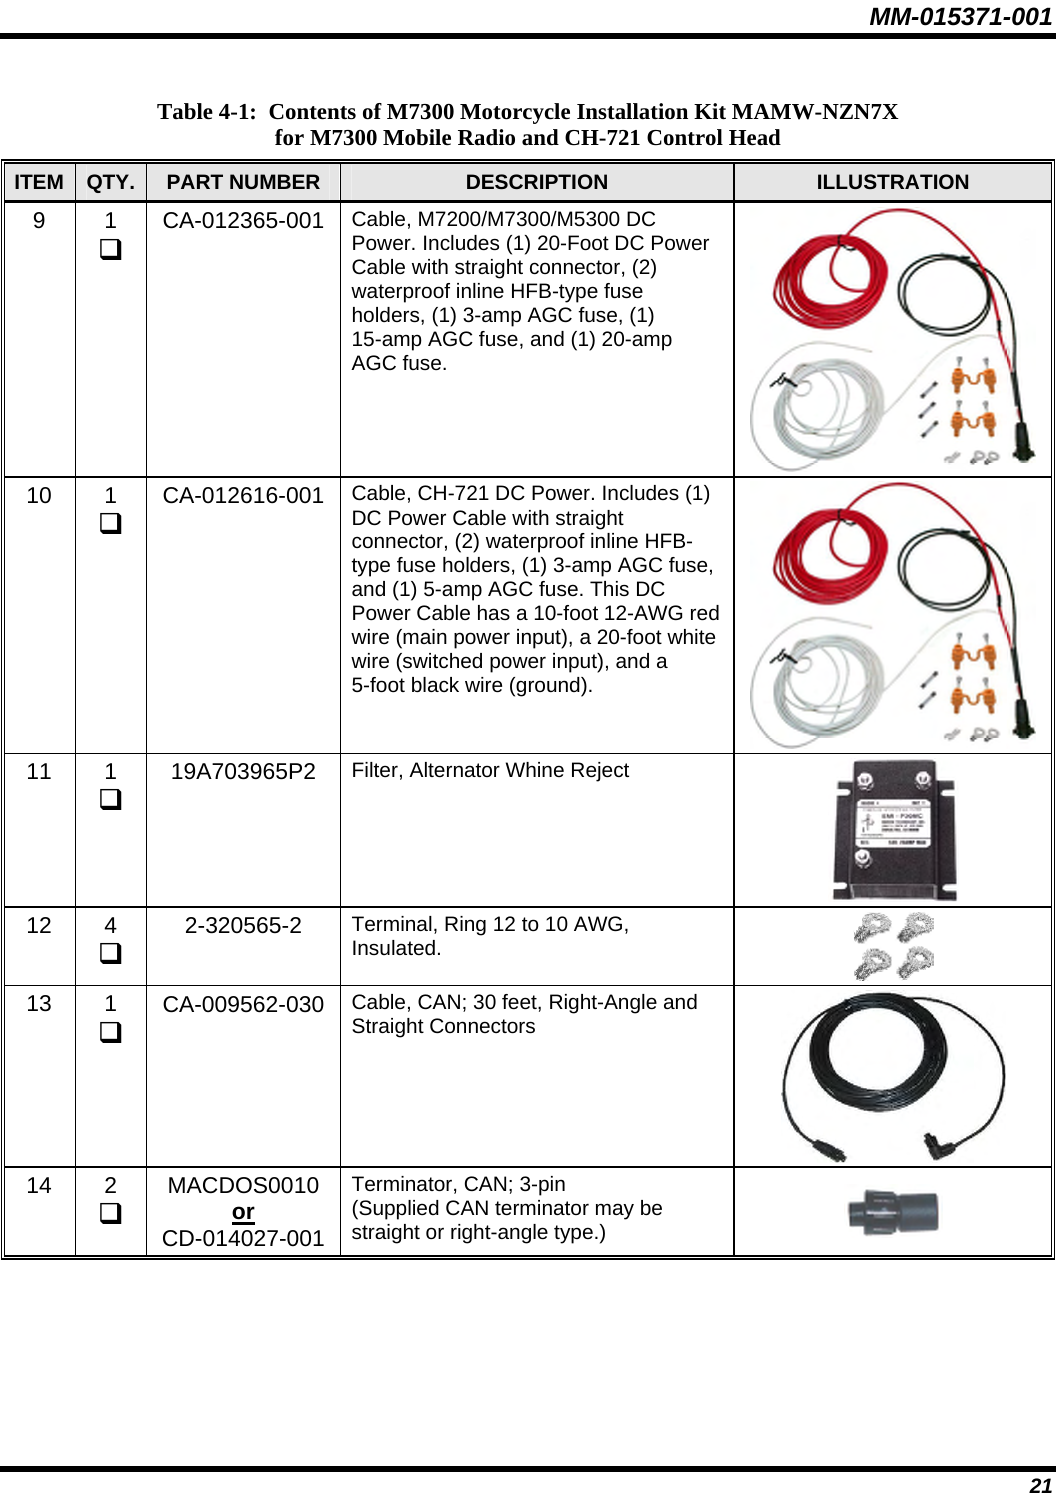 MM-015371-001 21 Table 4-1:  Contents of M7300 Motorcycle Installation Kit MAMW-NZfor M7300 Mobile Radio and CH-721 Control Head  N7X ITEM  QTY.  PART NUMBER  DESCRIPTION  ILLUSTRATION 9 1  CA-012365-001  Cable, M7200/M7300/M5300 DC Power. Includes (1) 20-Foot DC Power Cable with straight connector, (2) waterproof inline HFB-type fuse holders, (1) 3-amp AGC fuse, (1) 15-amp AGC fuse, and (1) 20-amp AGC fuse.  10 1  CA-012616-001  Cable, CH-721 DC Power. Includes (1) DC Power Cable with straight connector, (2) waterproof inline HFB-type fuse holders, (1) 3-amp AGC fuse, and (1) 5-amp AGC fuse. This DC Power Cable has a 10-foot 12-AWG red wire (main power input), a 20-foot white wire (switched power input), and a 5-foot black wire (ground).  11 1  19A703965P2  Filter, Alternator Whine Reject  12 4  2-320565-2  Terminal, Ring 12 to 10 AWG, Insulated.  13 1  CA-009562-030  Cable, CAN; 30 feet, Right-Angle and Straight Connectors  14 2  MACDOS0010 or CD-014027-001 Terminator, CAN; 3-pin (Supplied CAN terminator may be straight or right-angle type.)        